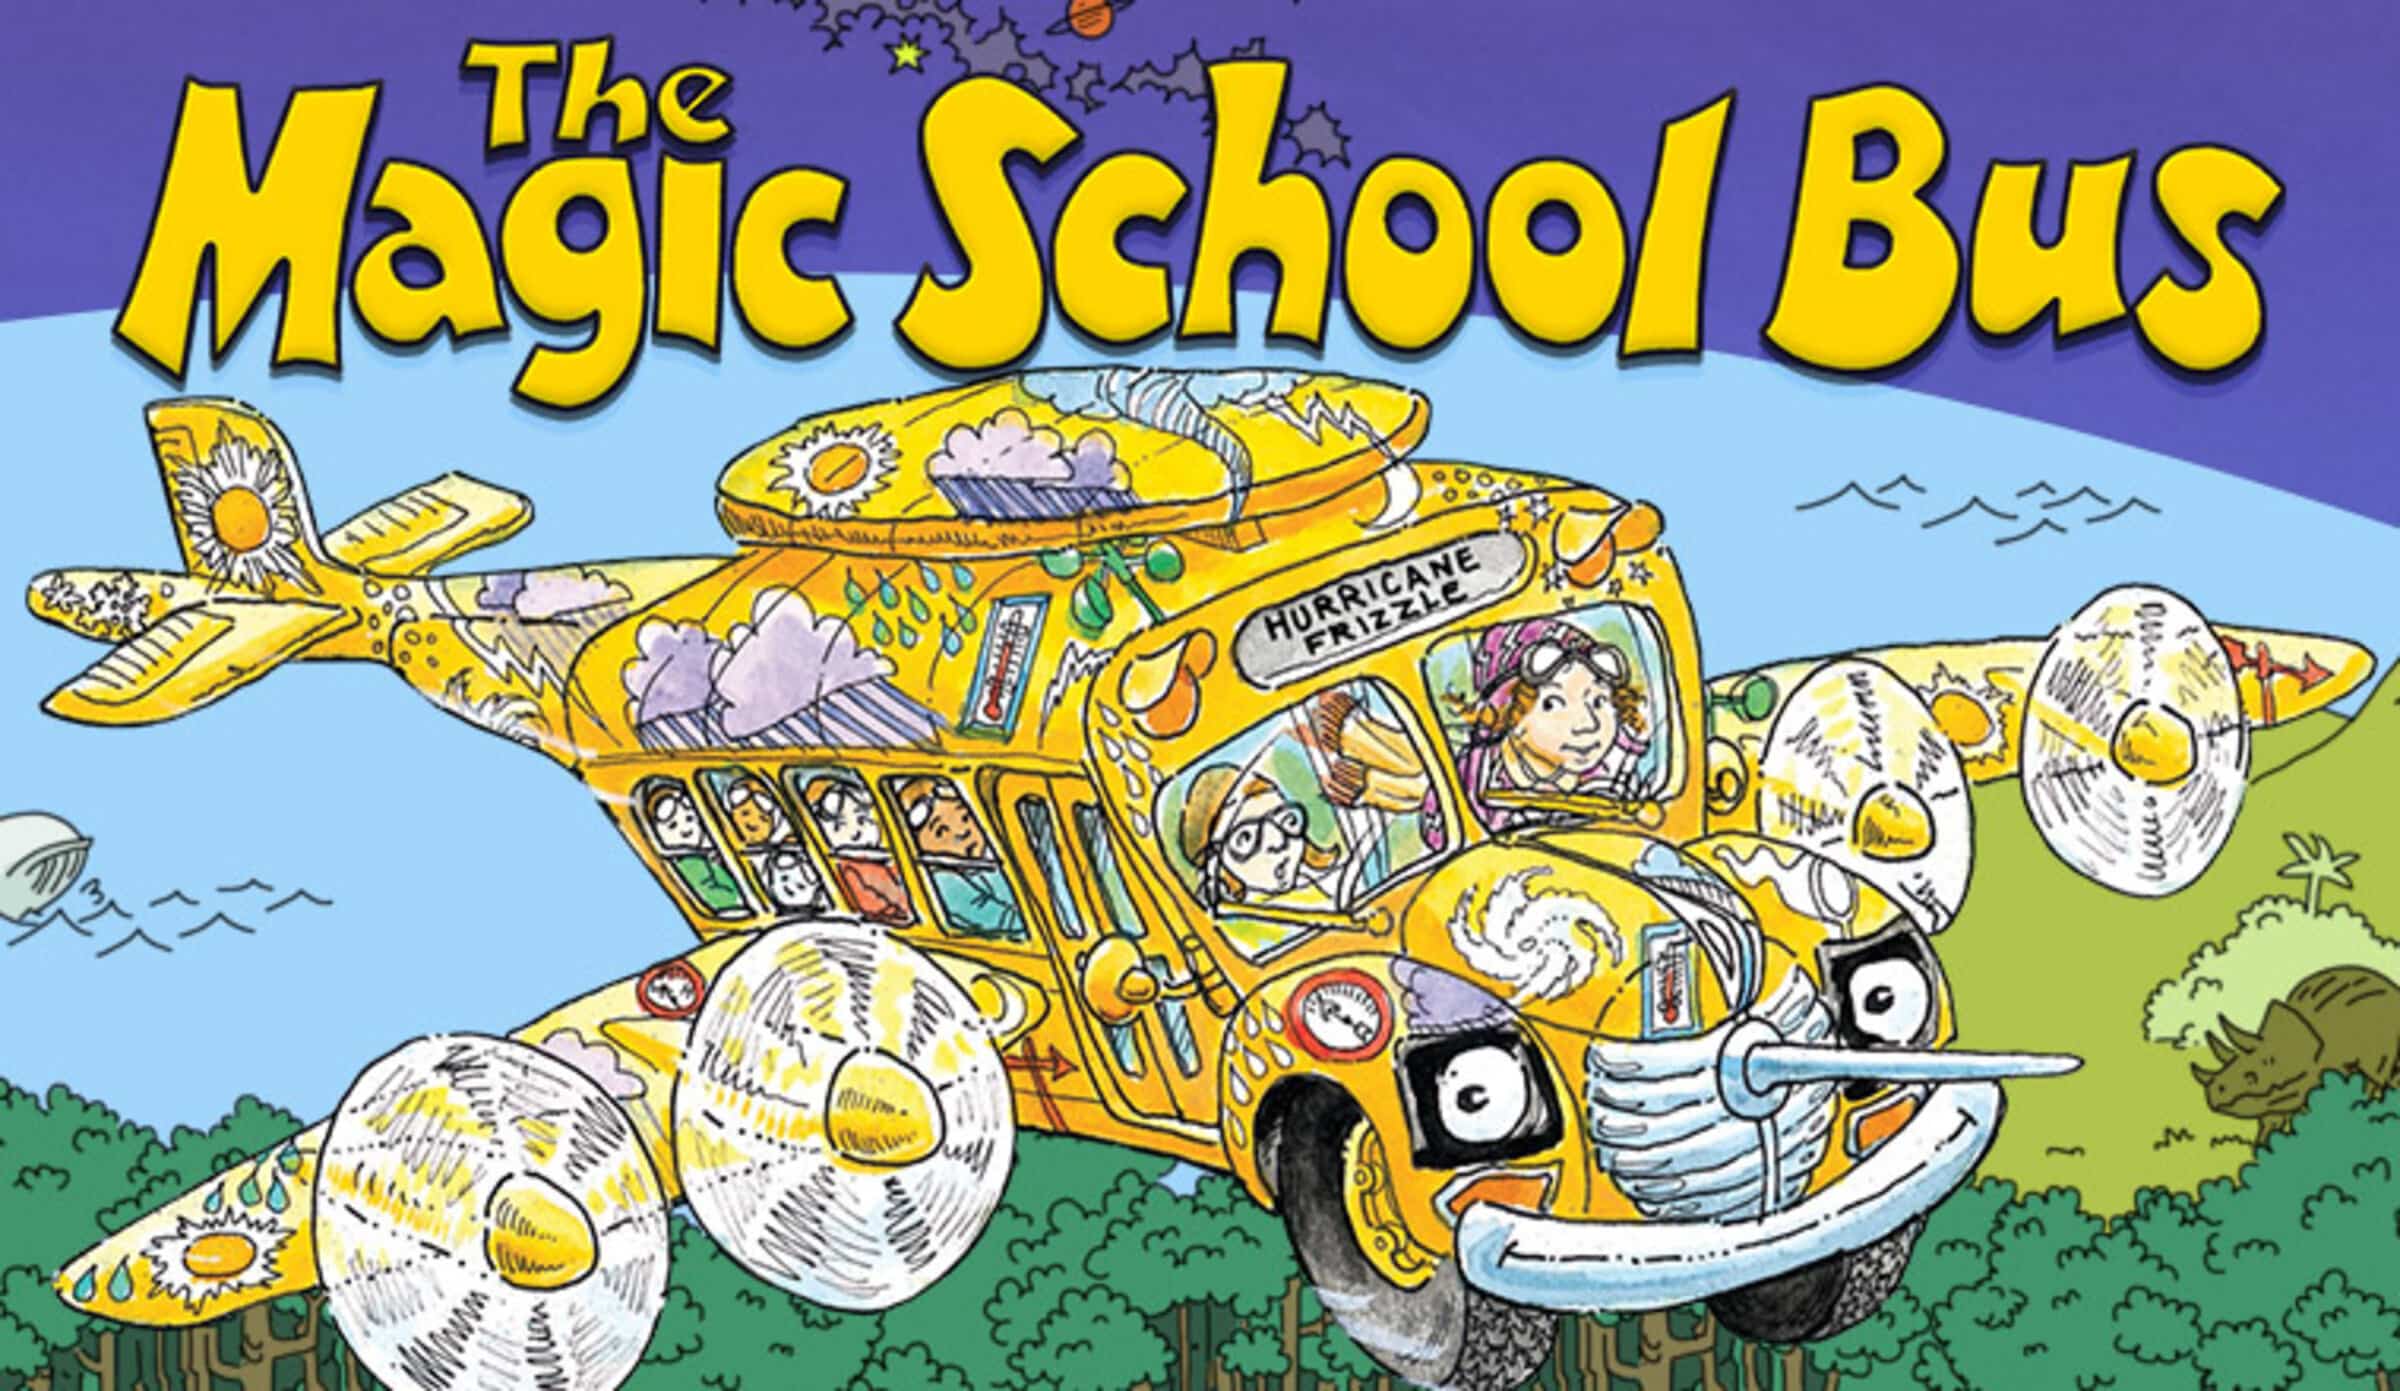 Get nostalgic with these 'Magic School Bus' memes on Twitter Film Daily